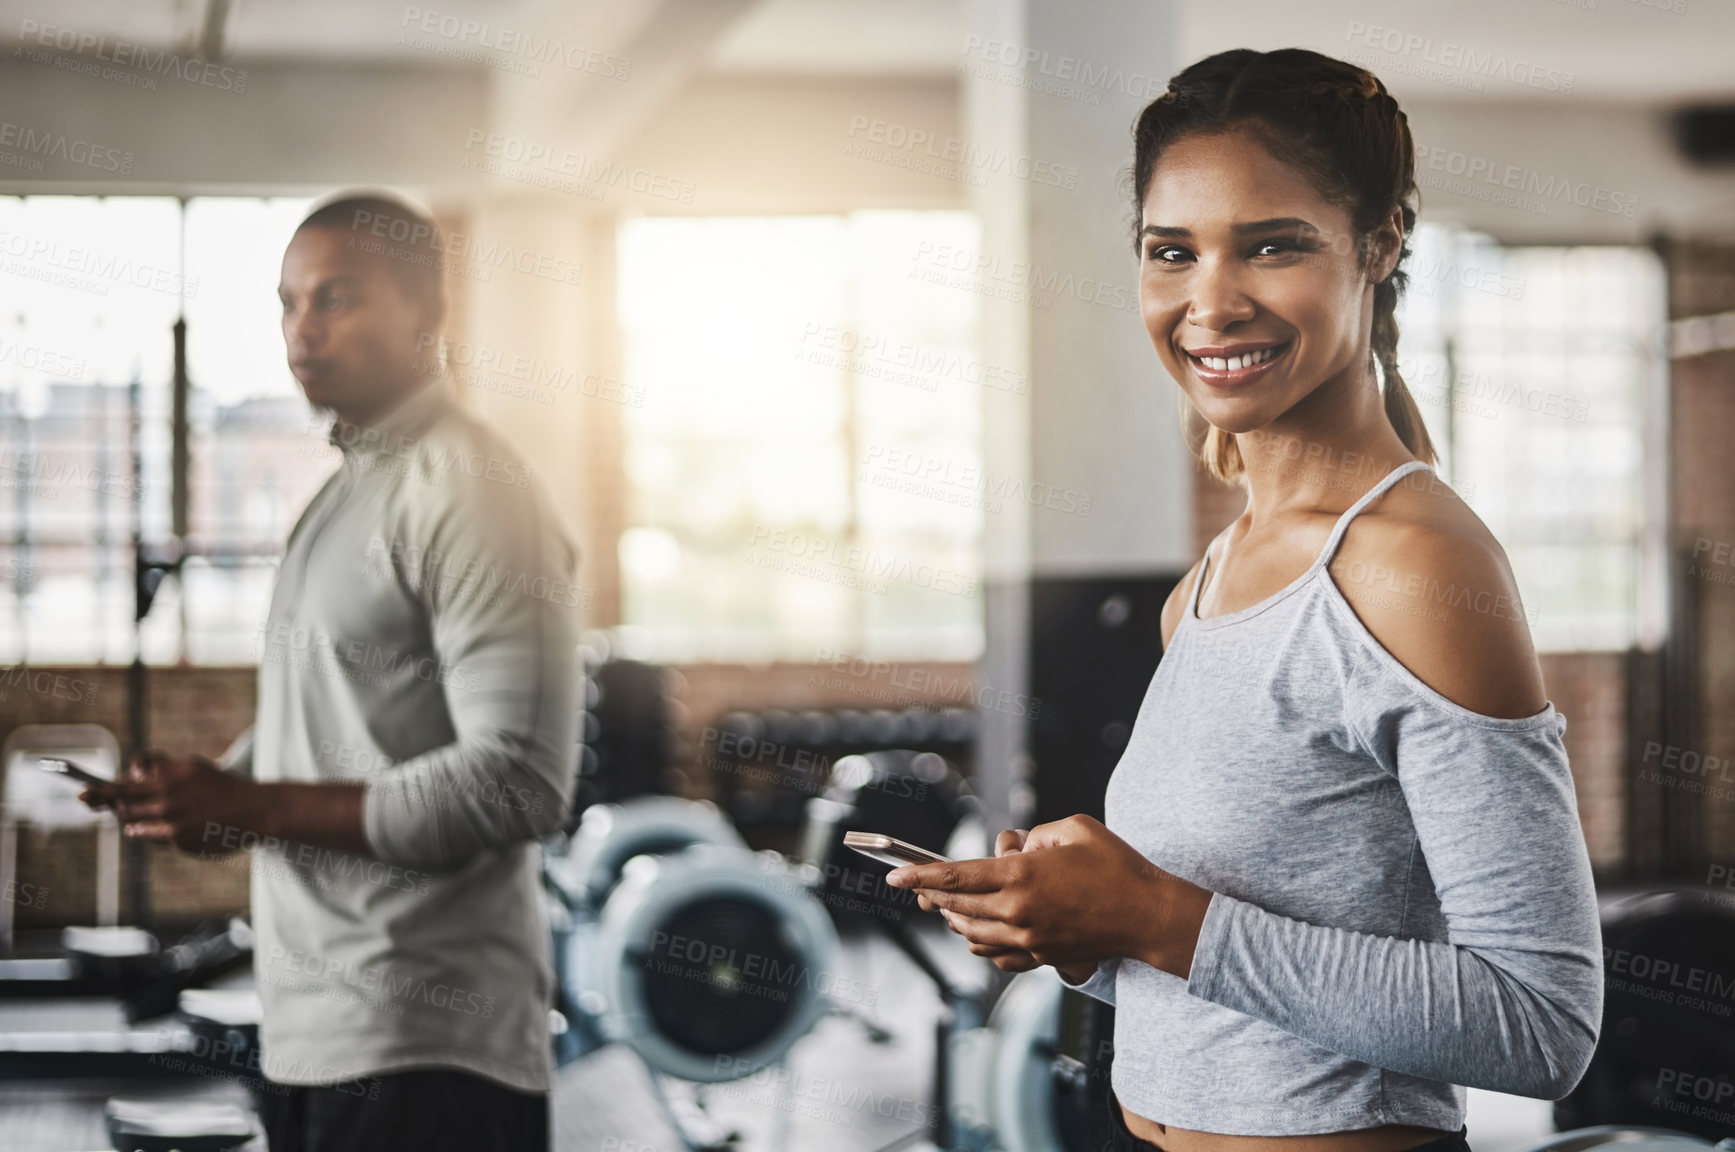 Buy stock photo Shot of a young woman using a mobile phone in a gym